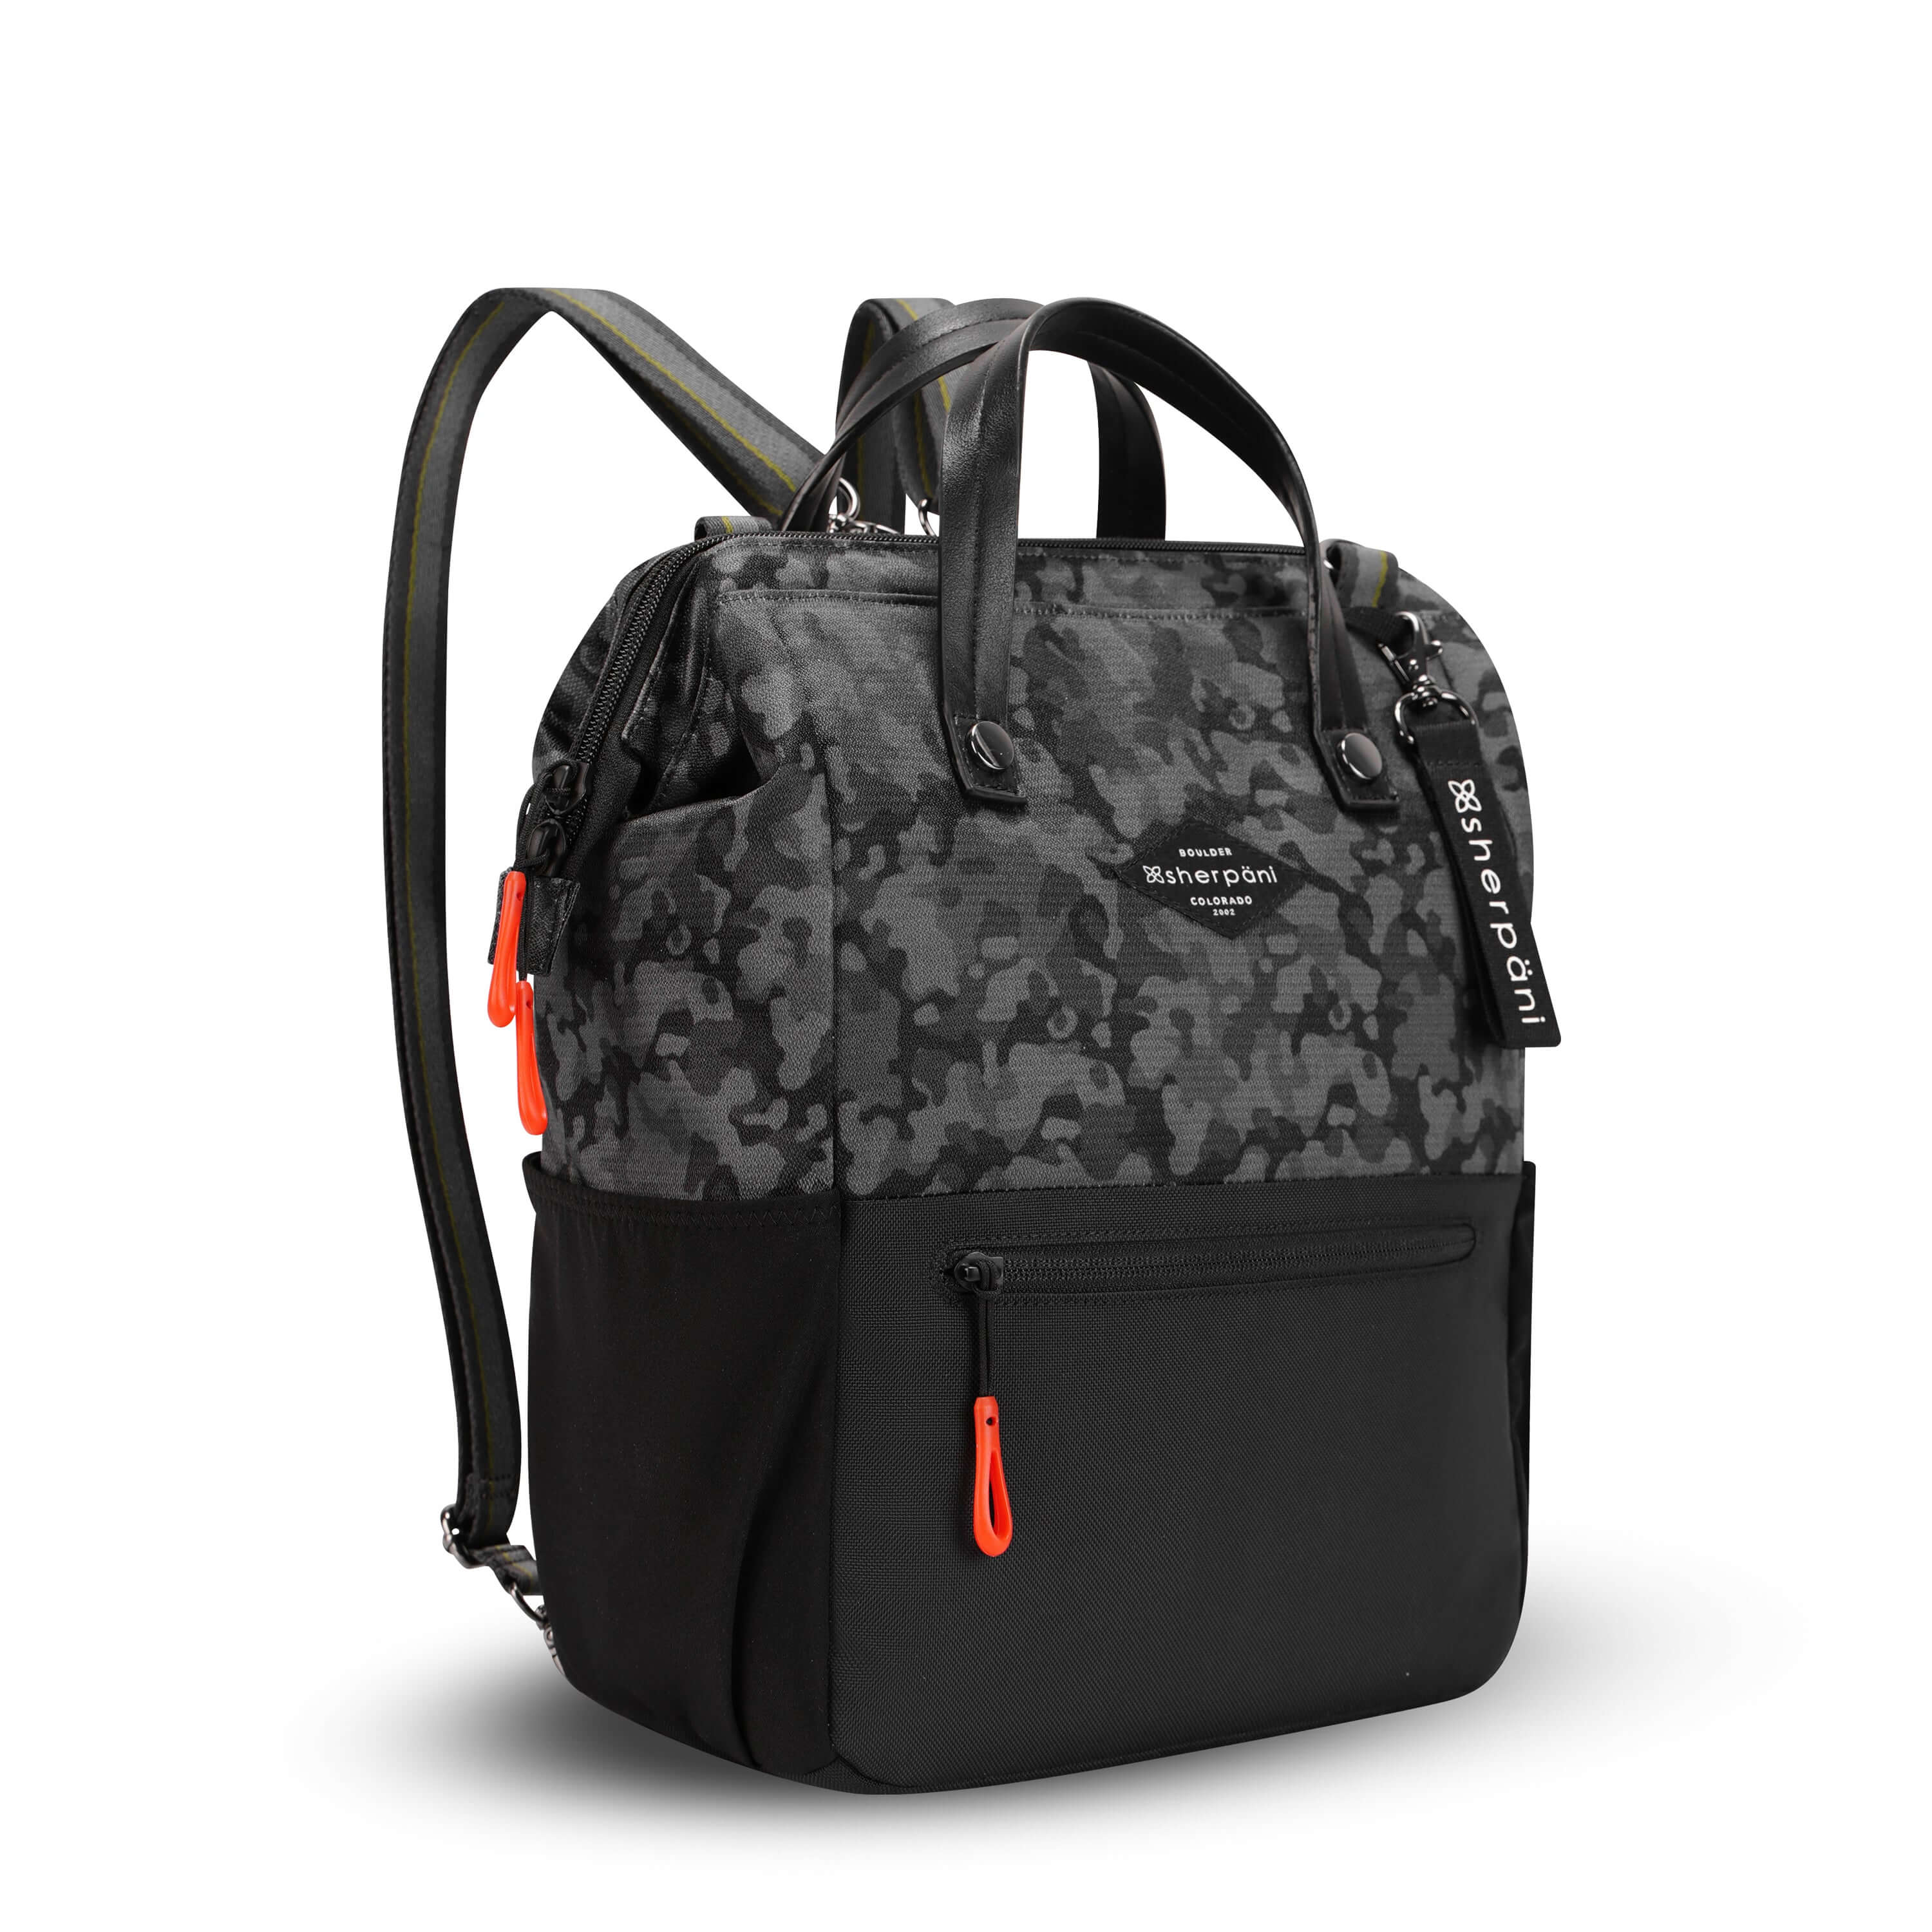 Angled front view of Sherpani three-in-one bag, the Dispatch in Dream Camo. The bag is two-toned: the top is a camouflage pattern of black and gray, and the bottom is black. There is an external zipper pocket on the front panel. Easy-pull zippers are accented in red. A branded Sherpani keychain is clipped to the upper right corner. Elastic water bottle holders sit on either side of the bag. It has short tote handles and adjustable/detachable straps that can function for a backpack or crossbody.